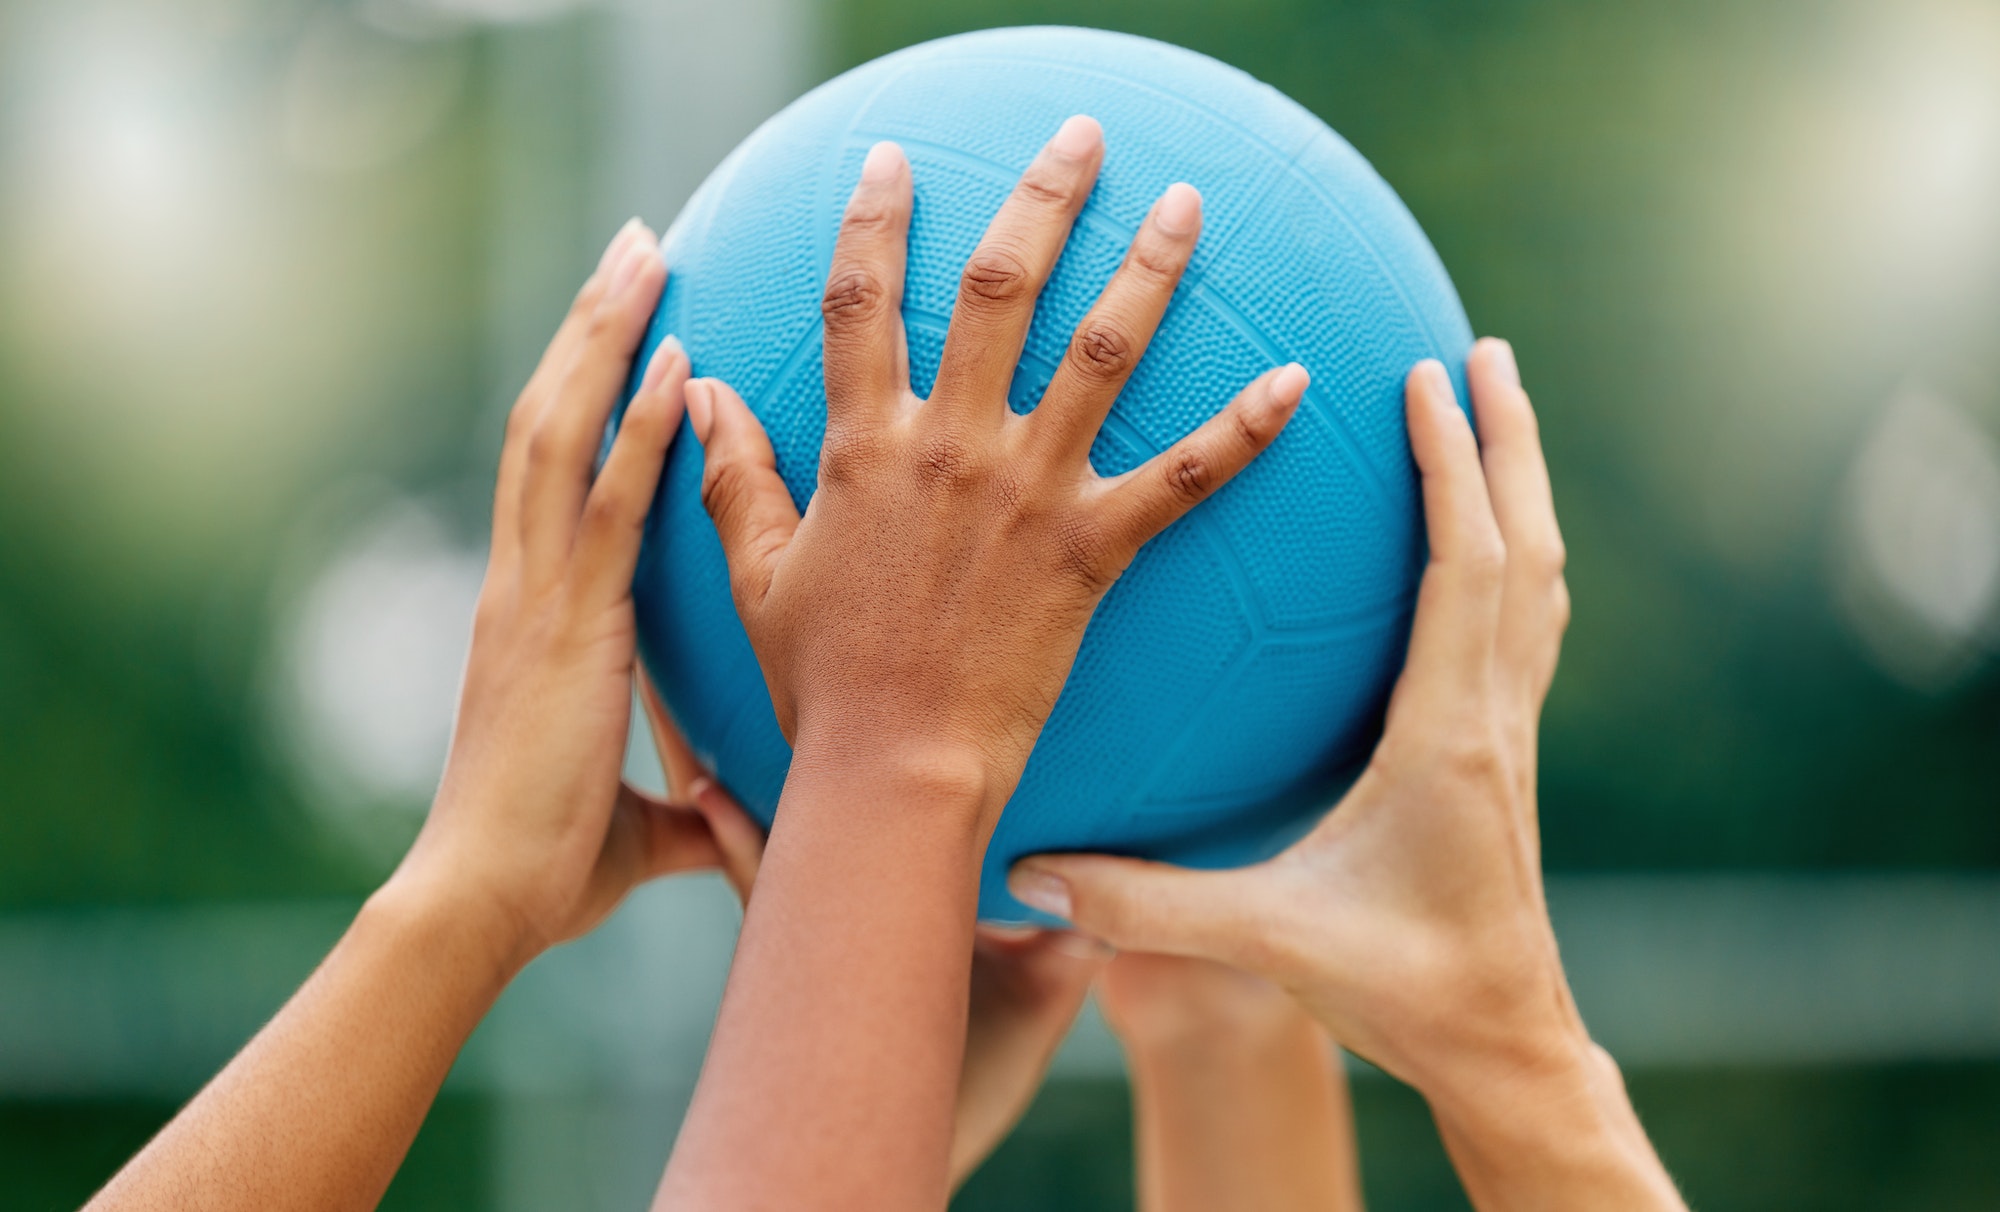 Netball, hands and woman holding a ball during a game for support, teamwork or training together. S